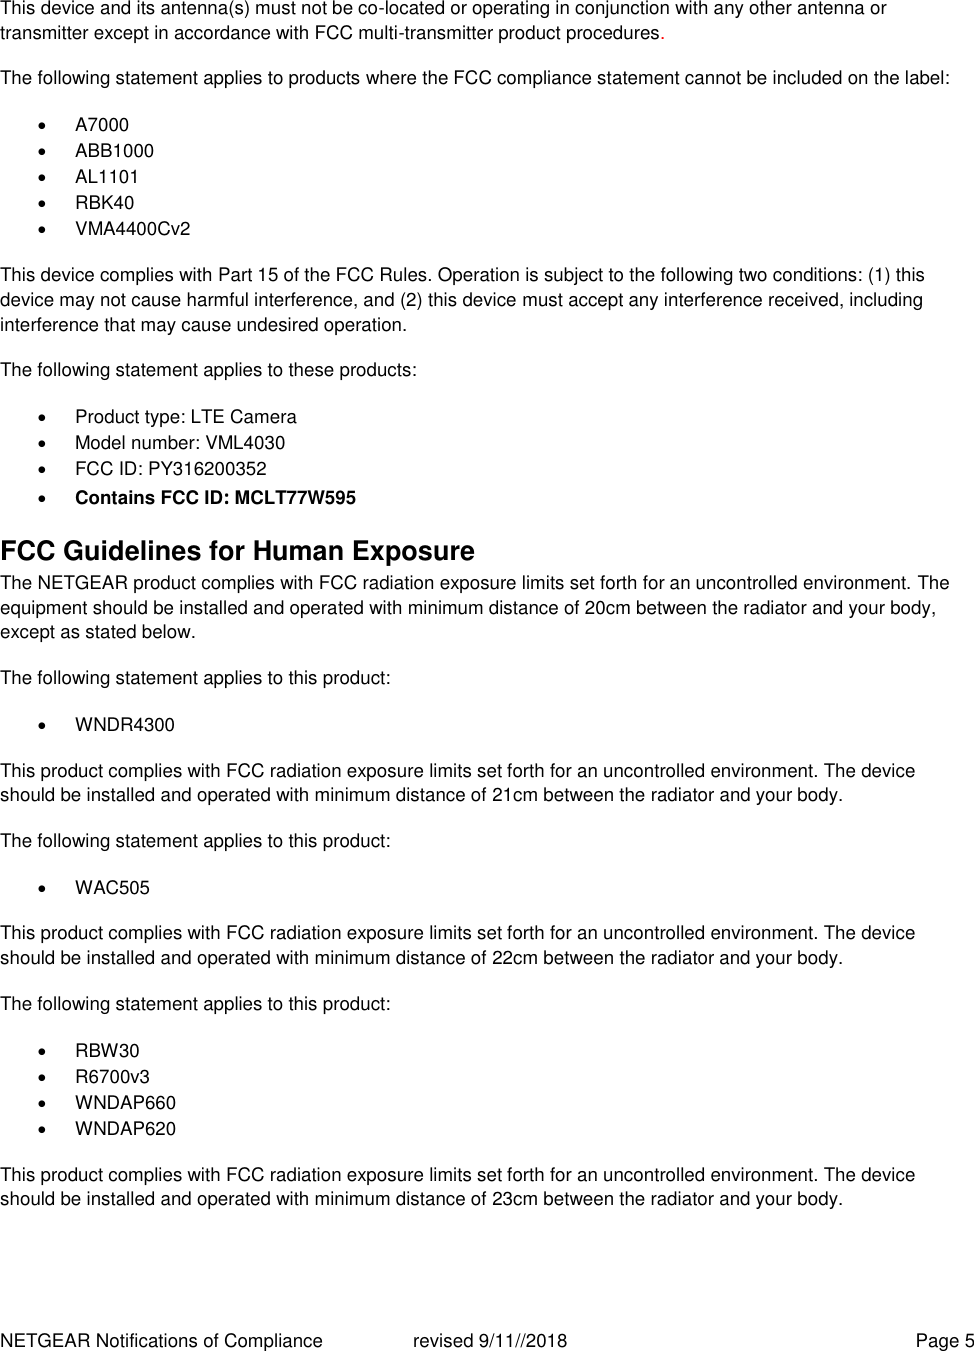 NETGEAR Notifications of Compliance    revised 9/11//2018  Page 5  This device and its antenna(s) must not be co-located or operating in conjunction with any other antenna or transmitter except in accordance with FCC multi-transmitter product procedures.  The following statement applies to products where the FCC compliance statement cannot be included on the label:   A7000   ABB1000   AL1101   RBK40   VMA4400Cv2 This device complies with Part 15 of the FCC Rules. Operation is subject to the following two conditions: (1) this device may not cause harmful interference, and (2) this device must accept any interference received, including interference that may cause undesired operation. The following statement applies to these products:   Product type: LTE Camera   Model number: VML4030   FCC ID: PY316200352  Contains FCC ID: MCLT77W595 FCC Guidelines for Human Exposure The NETGEAR product complies with FCC radiation exposure limits set forth for an uncontrolled environment. The equipment should be installed and operated with minimum distance of 20cm between the radiator and your body, except as stated below. The following statement applies to this product:   WNDR4300 This product complies with FCC radiation exposure limits set forth for an uncontrolled environment. The device should be installed and operated with minimum distance of 21cm between the radiator and your body. The following statement applies to this product:   WAC505 This product complies with FCC radiation exposure limits set forth for an uncontrolled environment. The device should be installed and operated with minimum distance of 22cm between the radiator and your body. The following statement applies to this product:   RBW30   R6700v3   WNDAP660   WNDAP620 This product complies with FCC radiation exposure limits set forth for an uncontrolled environment. The device should be installed and operated with minimum distance of 23cm between the radiator and your body.    